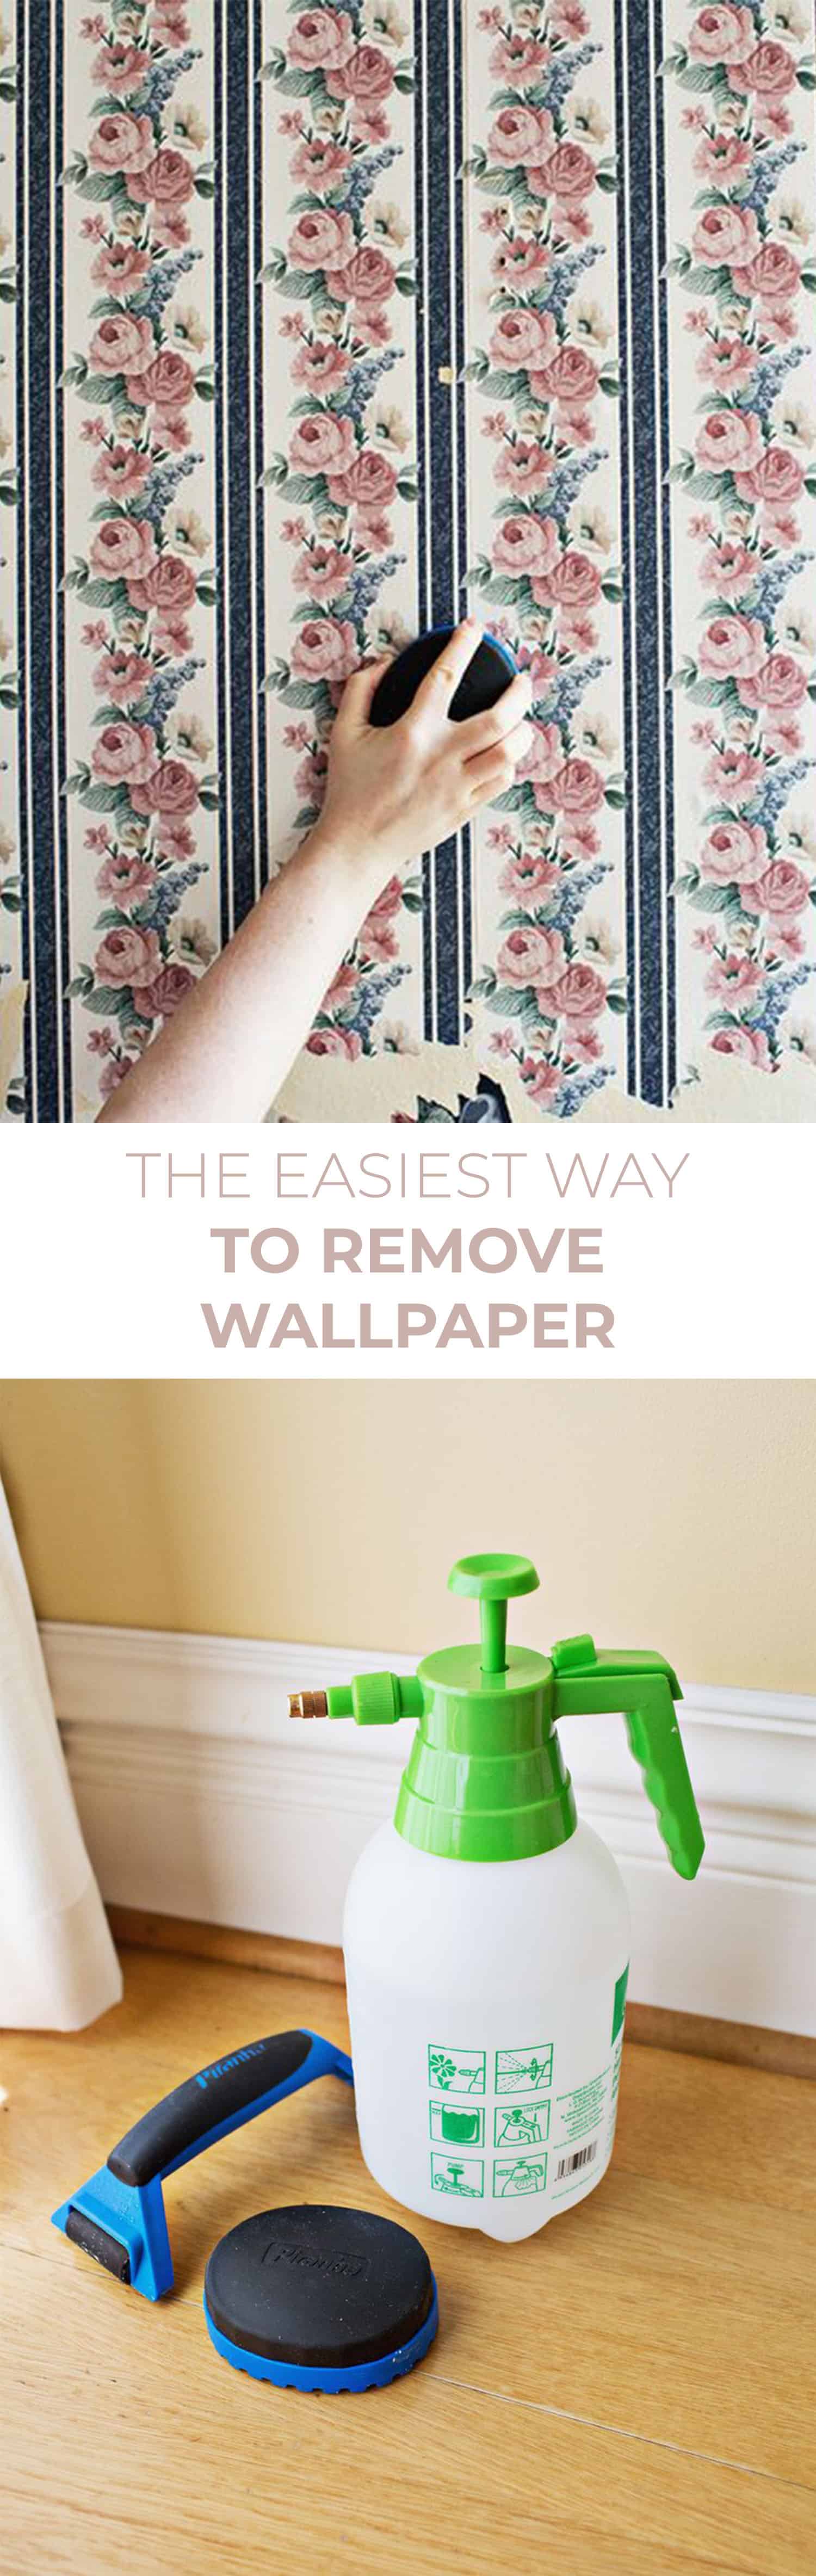 Simple Wallpaper Removing Tips - A